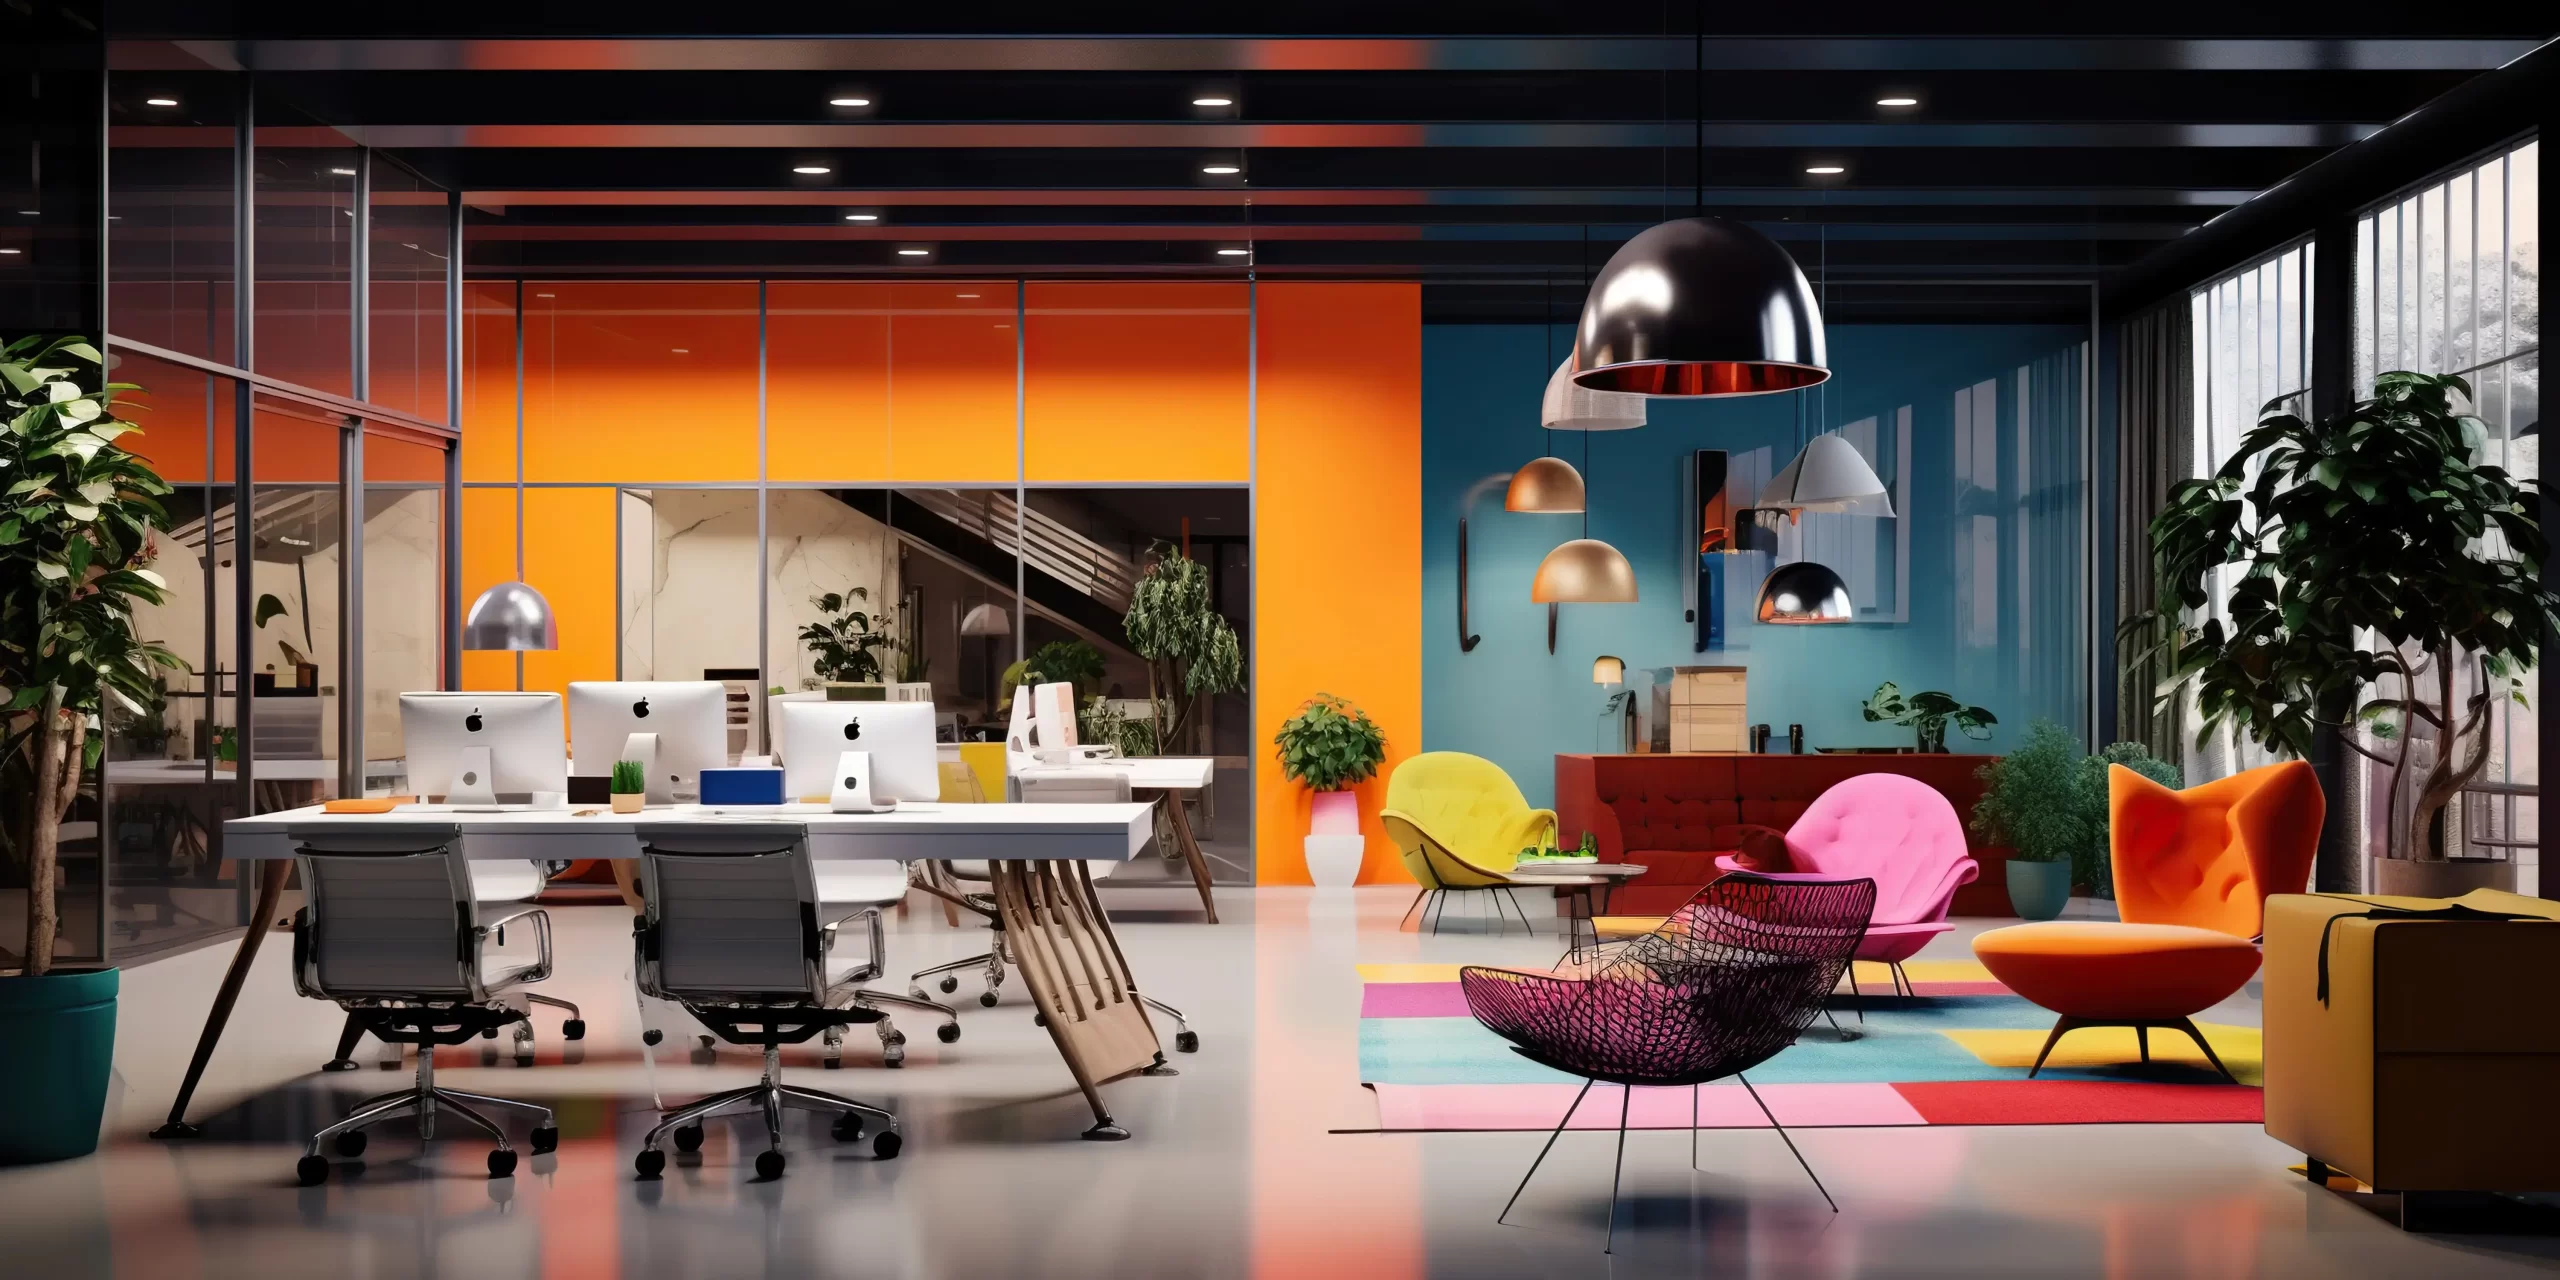 https://whitehillsdesign.com/wp-content/uploads/2023/12/colorful-office-desks-chairs-are-neatly-arranged-there-is-nobody-sight-vibrant-atmosphere-awaits-hustle-bustle-busy-workday-generative-ai_3111-scaled.webp